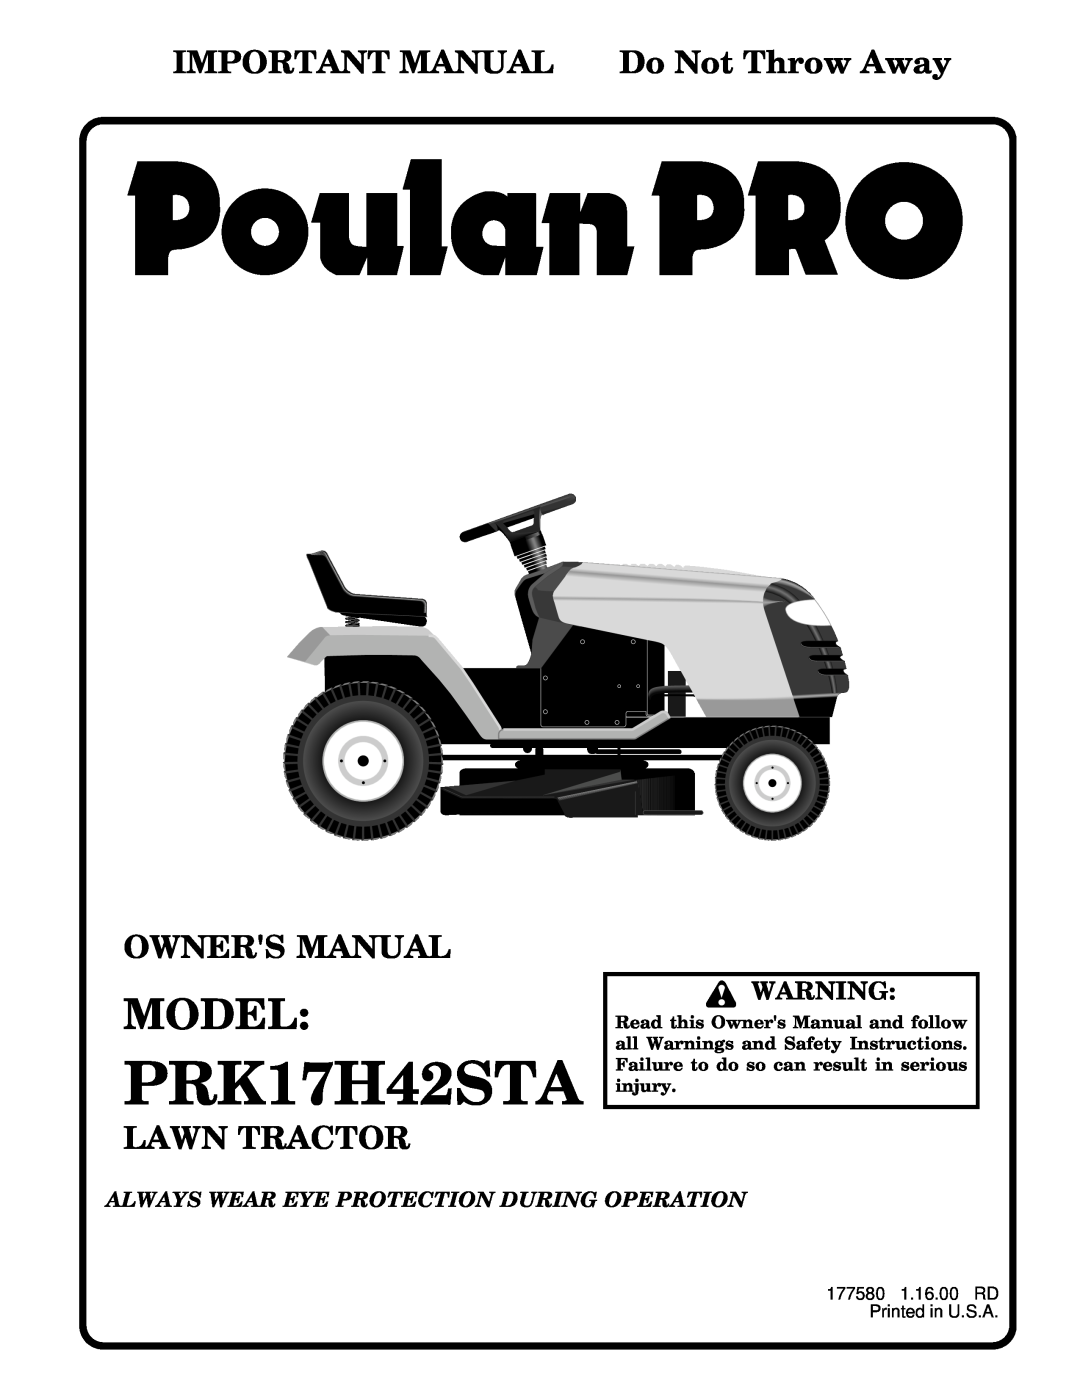 Poulan PRK17H42STA owner manual Model, IMPORTANT MANUAL Do Not Throw Away, Lawn Tractor 